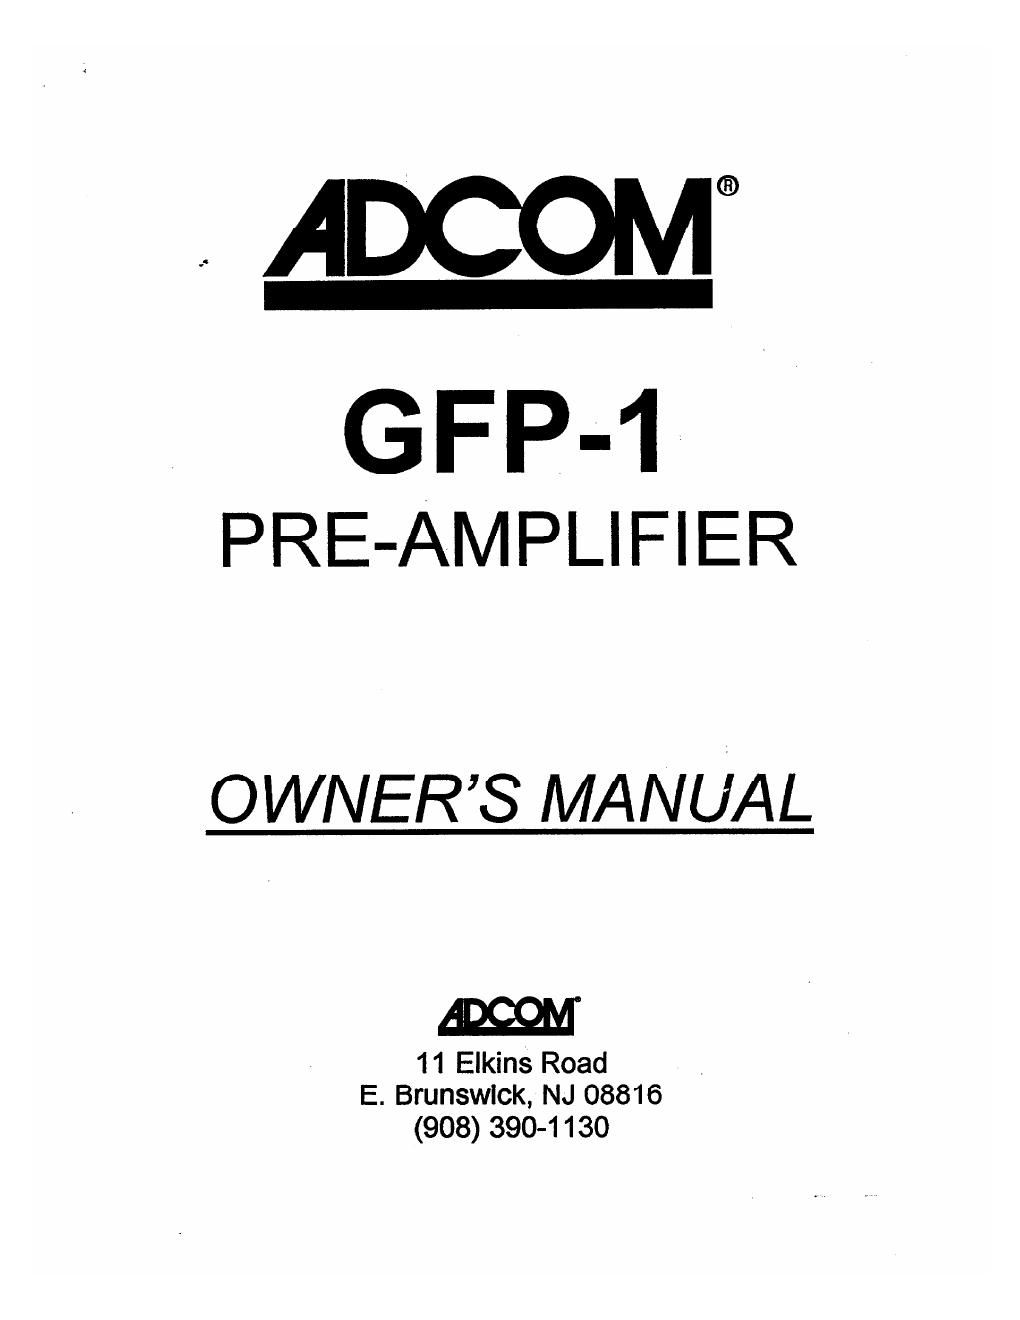 adcom gfp 1 owners manual